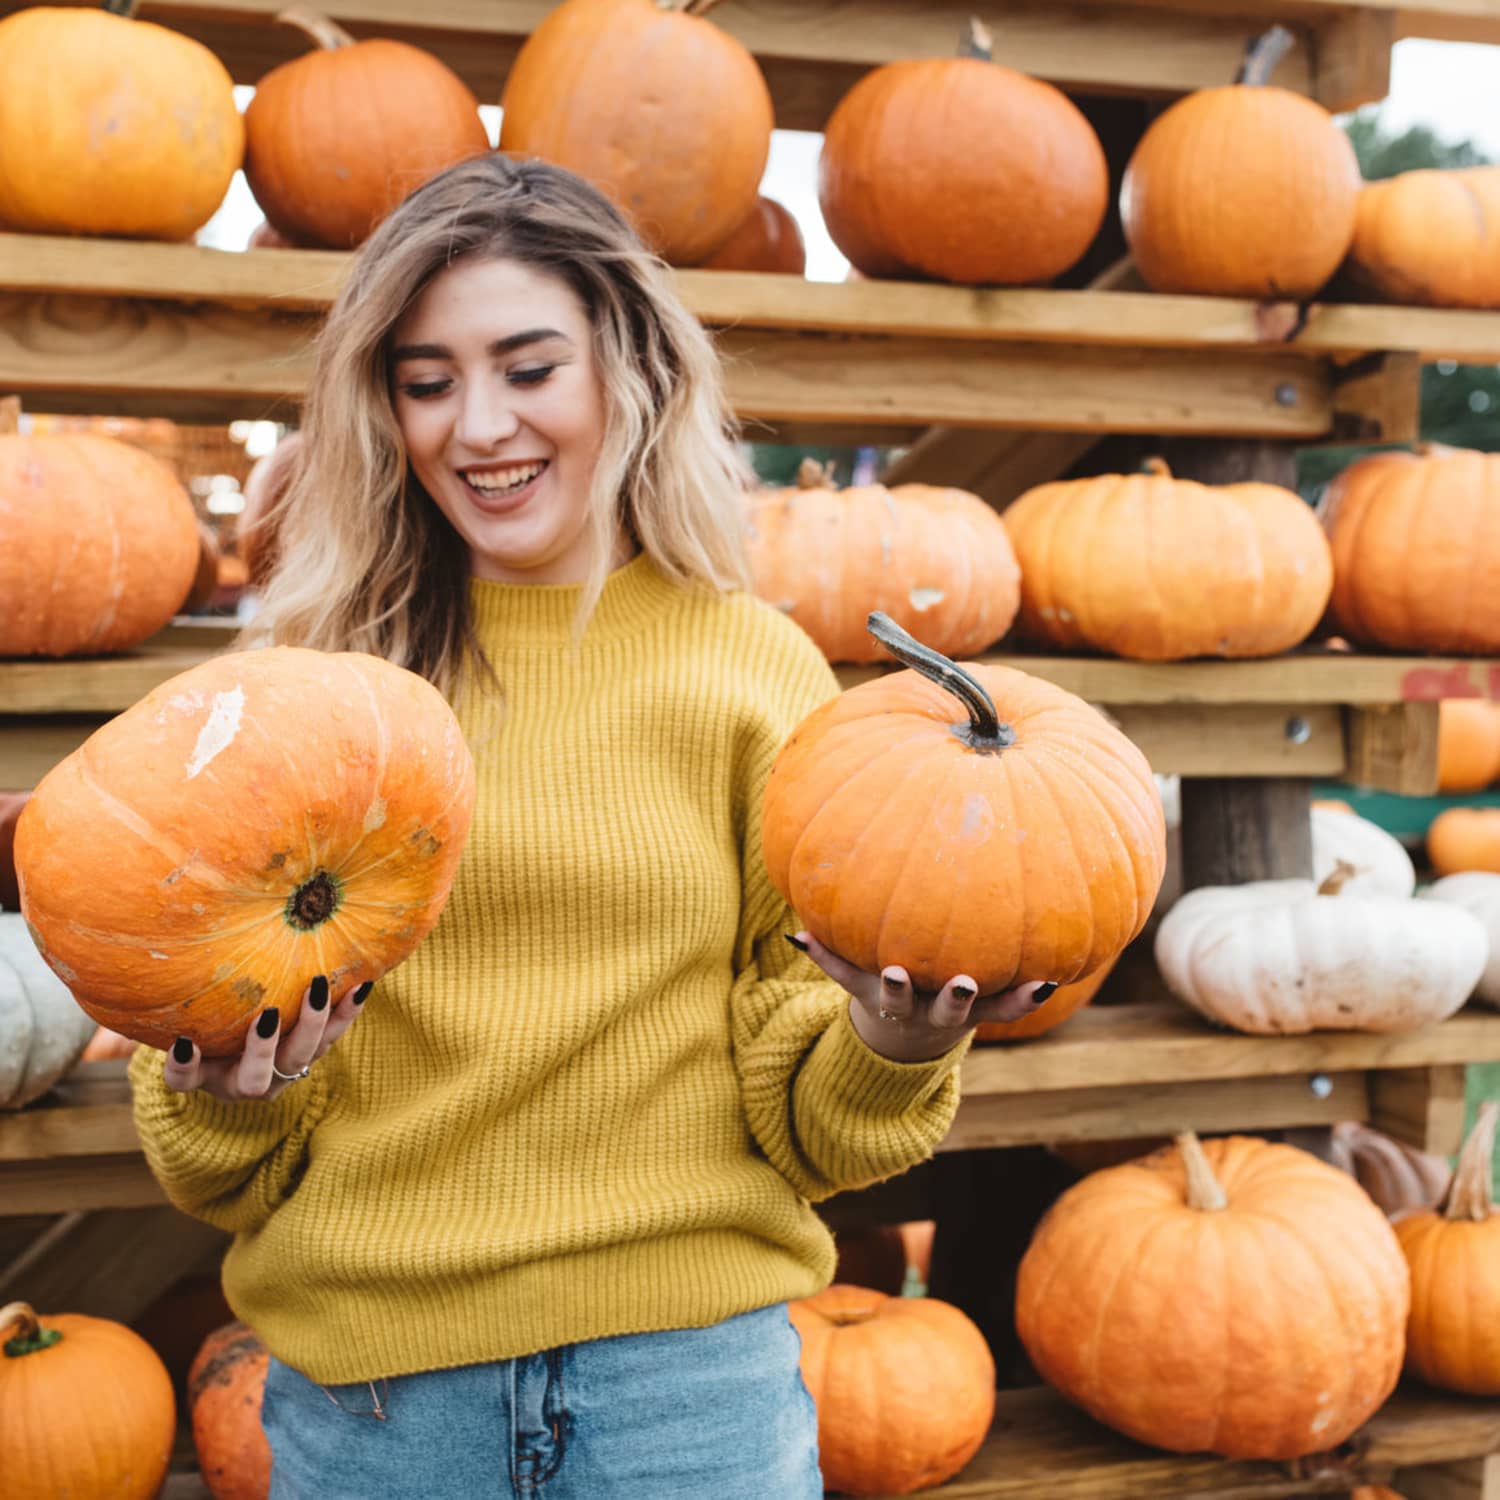 25 of the BEST Things to Do in the Fall for Under $15 - The Busy Budgeter